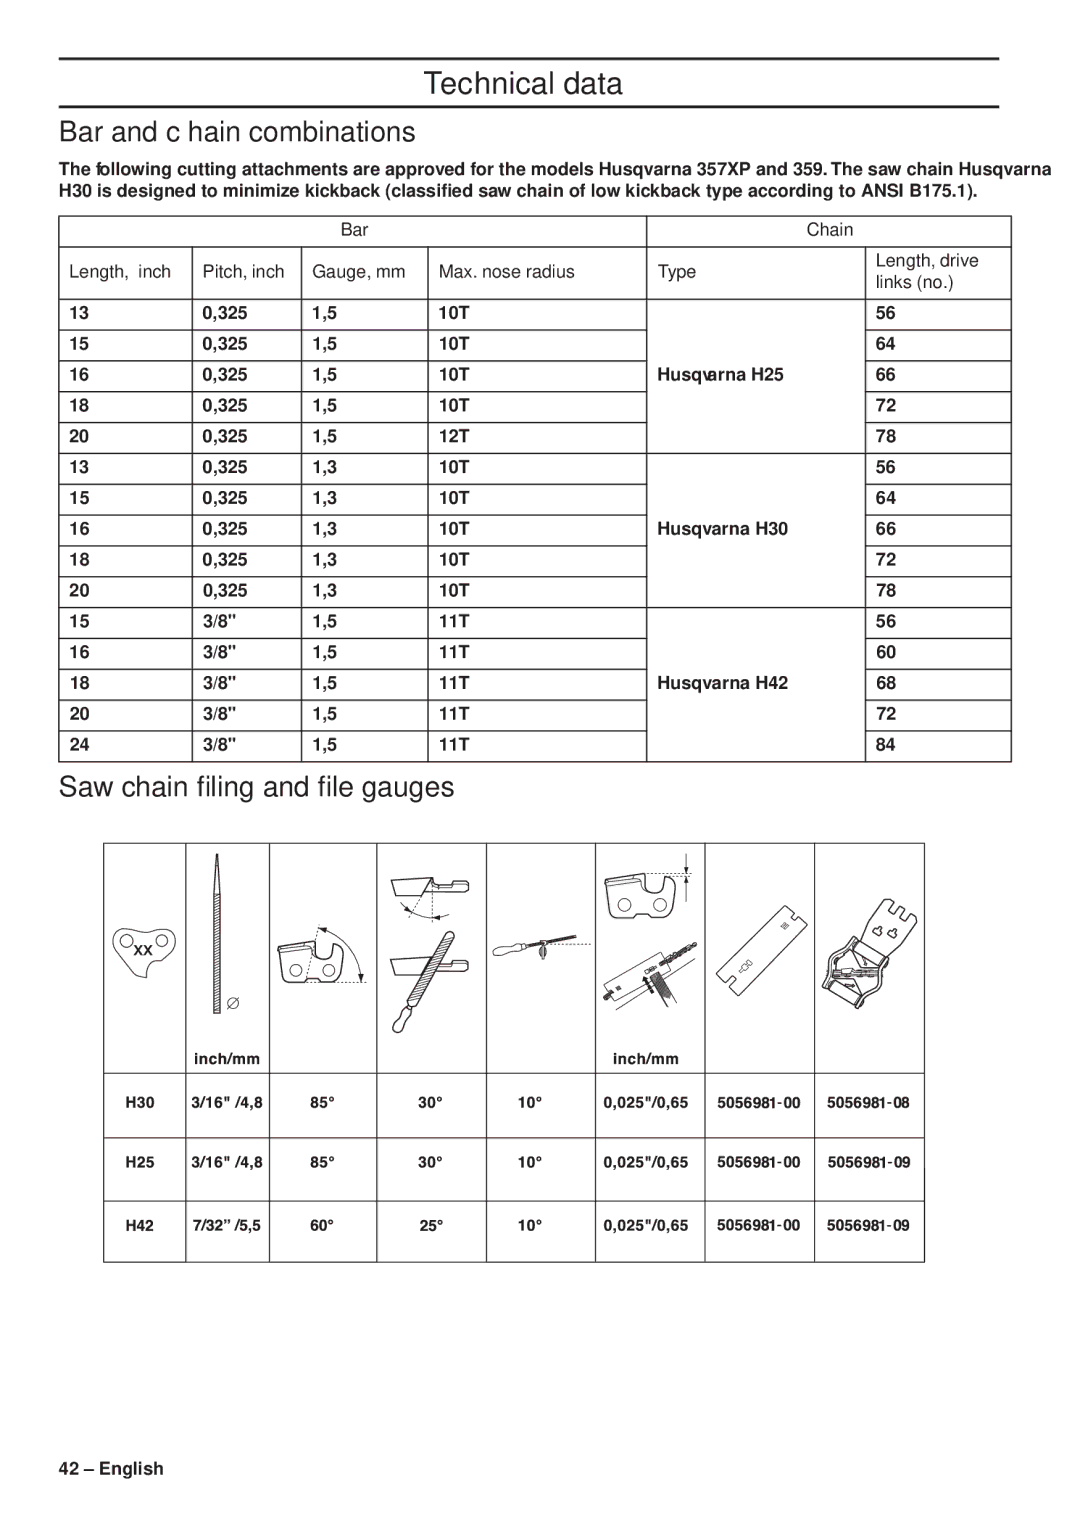 Husqvarna 1153179-26 manual Bar and chain combinations, Saw chain ﬁling and ﬁle gauges 